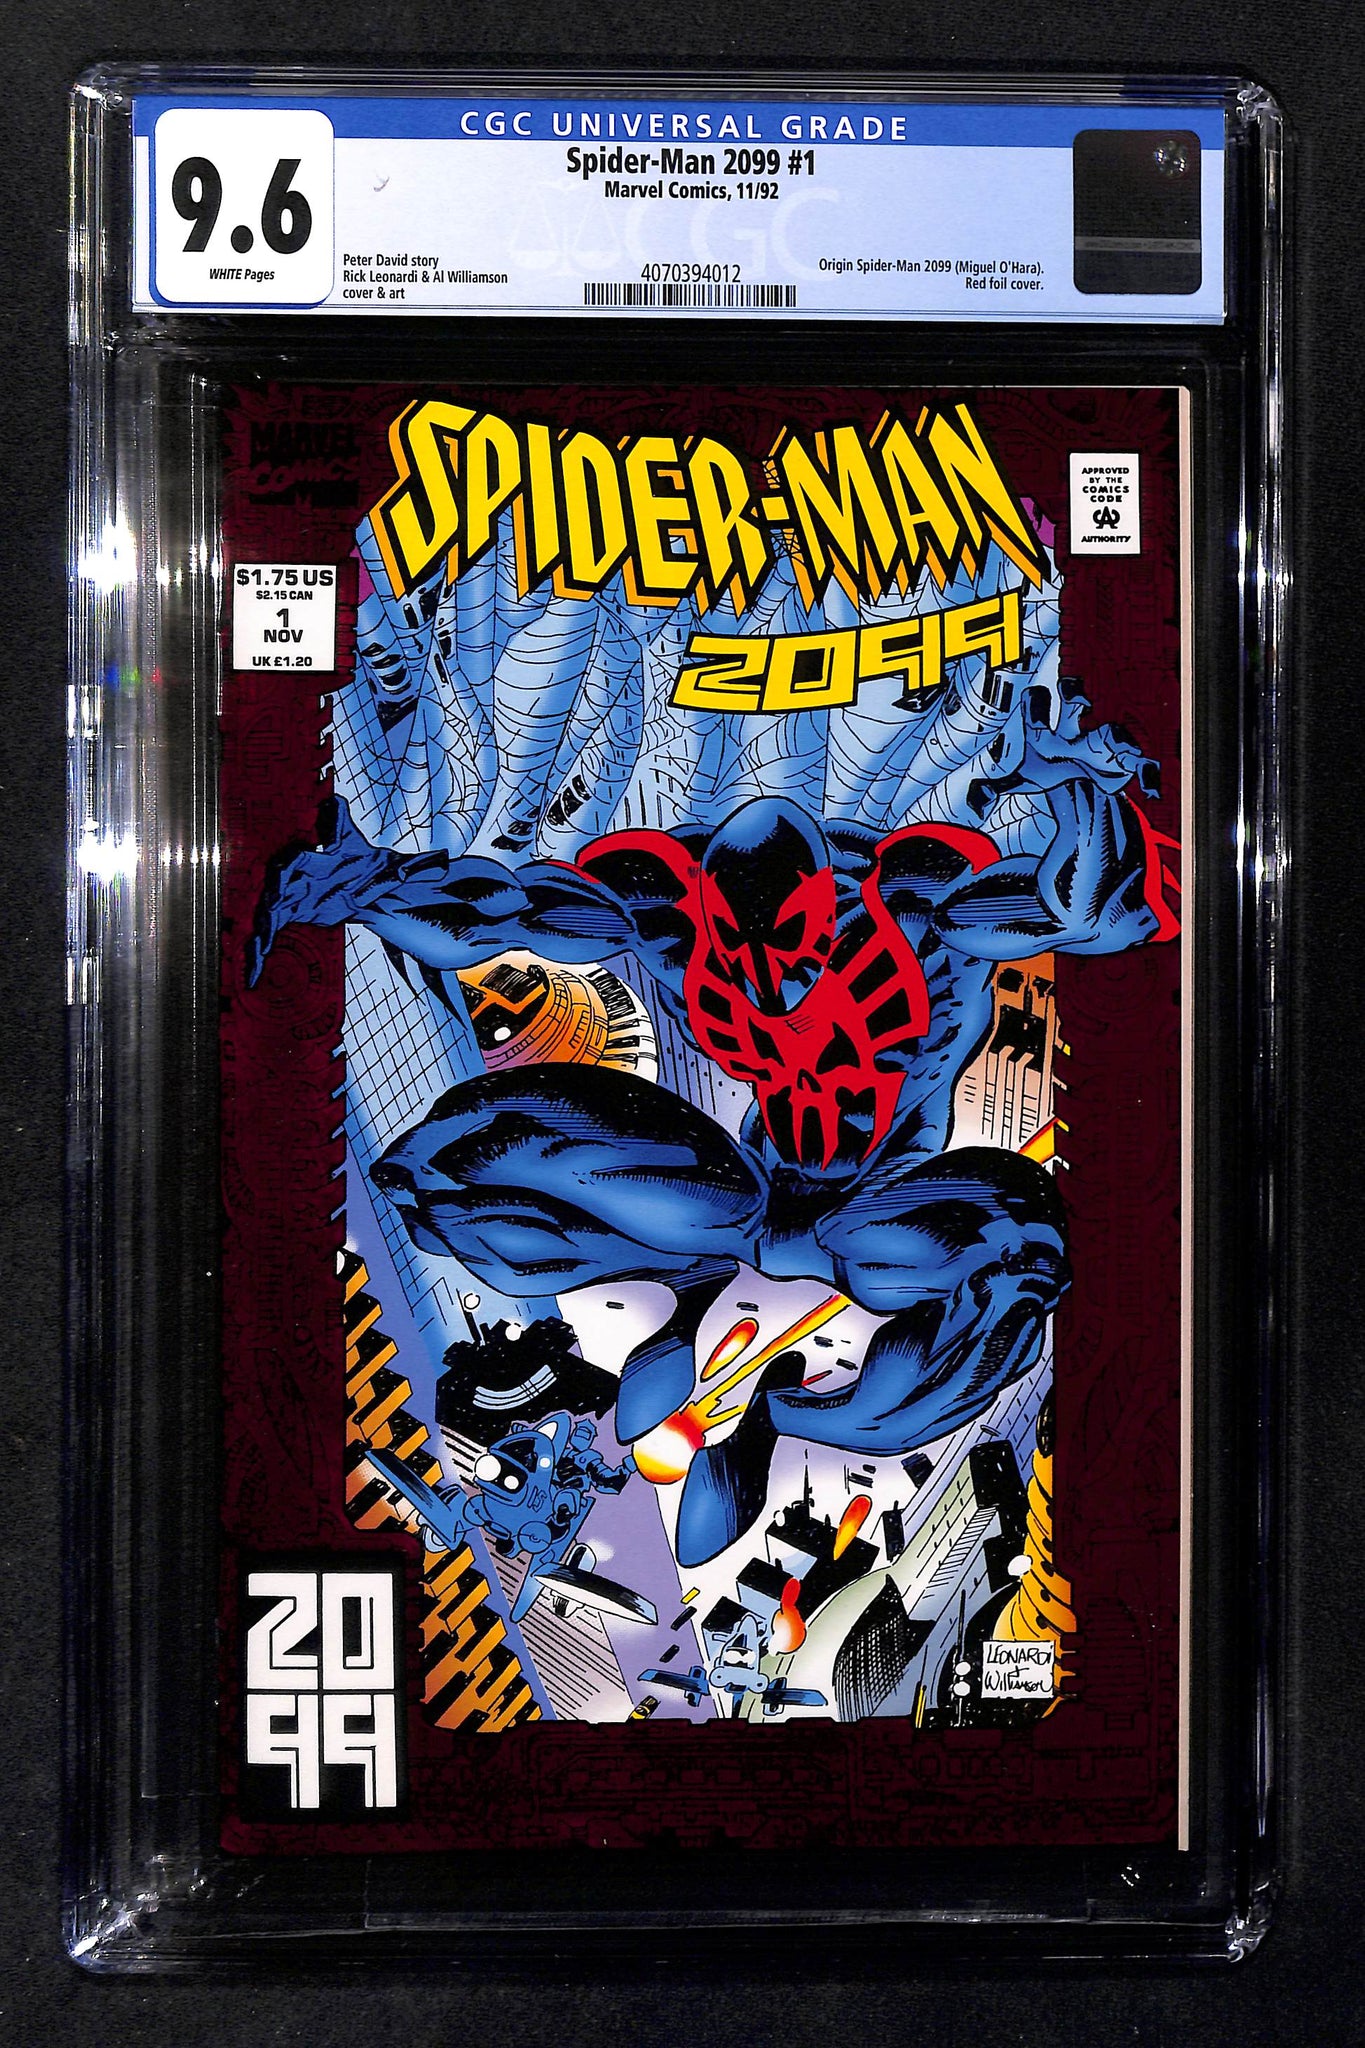 Spider-Man 2099 #1 CGC 9.6 Red foil cover